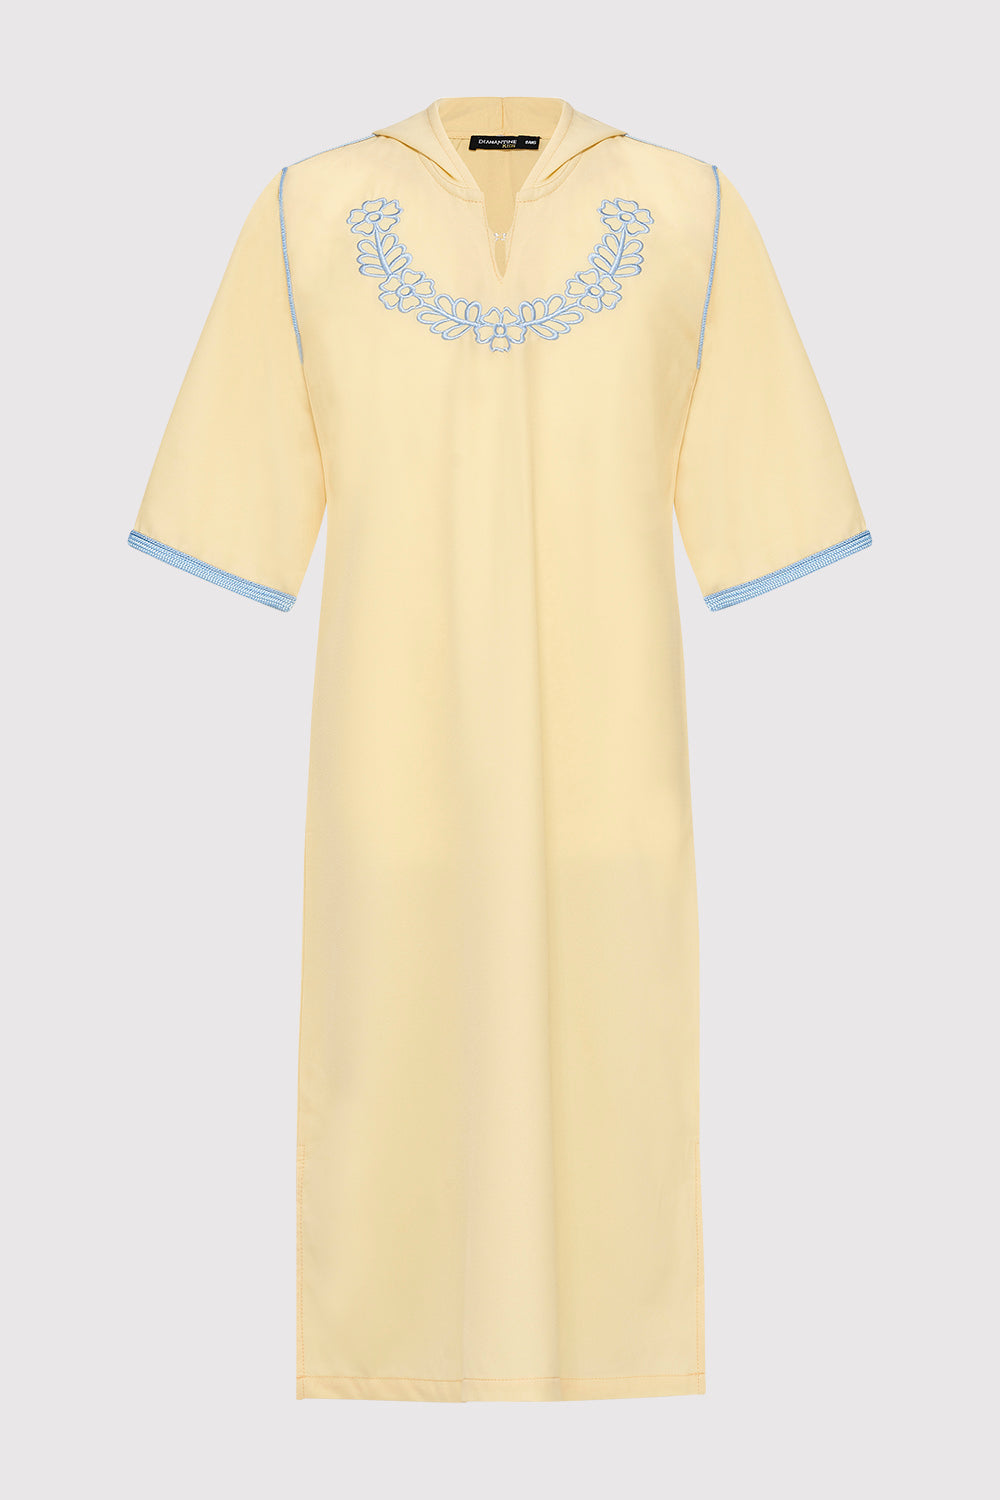 Djellaba Ayat Girl's Embroidered Cropped Sleeve Hooded Dress in Yellow (2-12yrs)